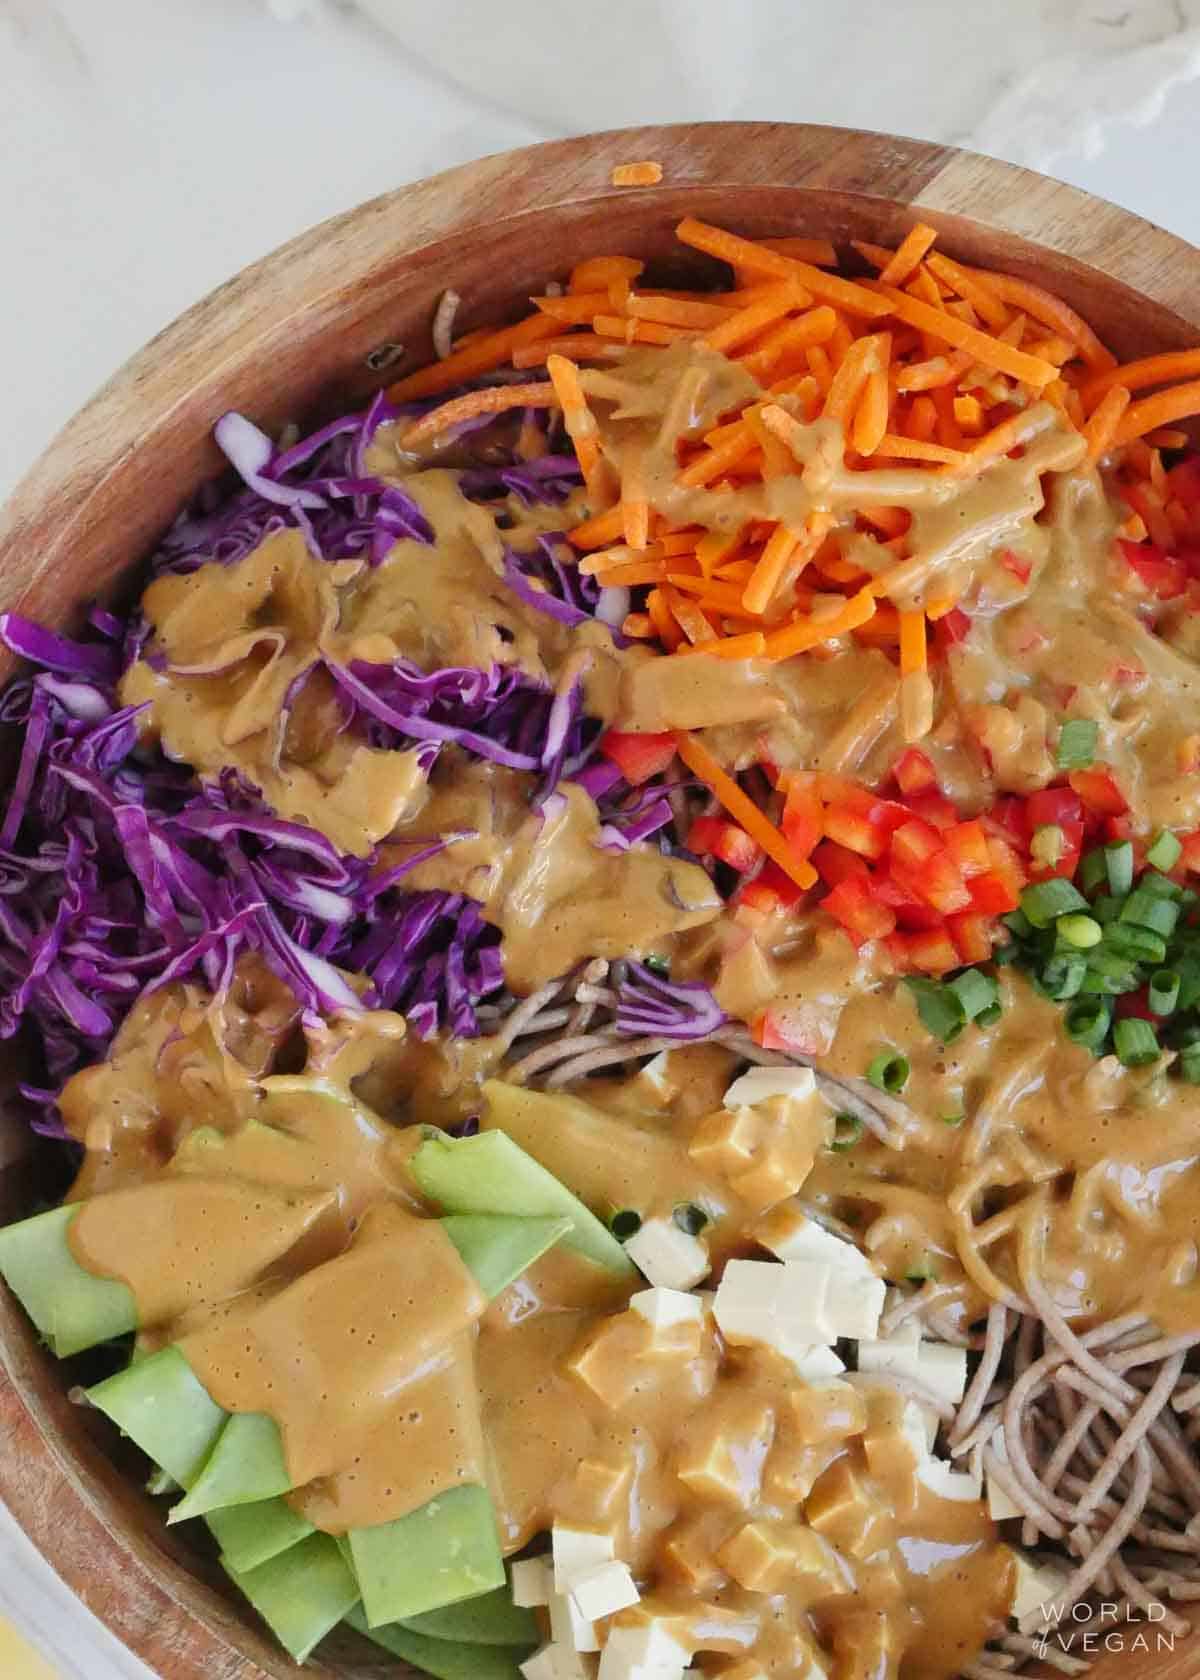 A bowl of cold peanut noodle salad with purple cabbage, carrots, peas, tofu, green onion, and sesame peanut sauce.